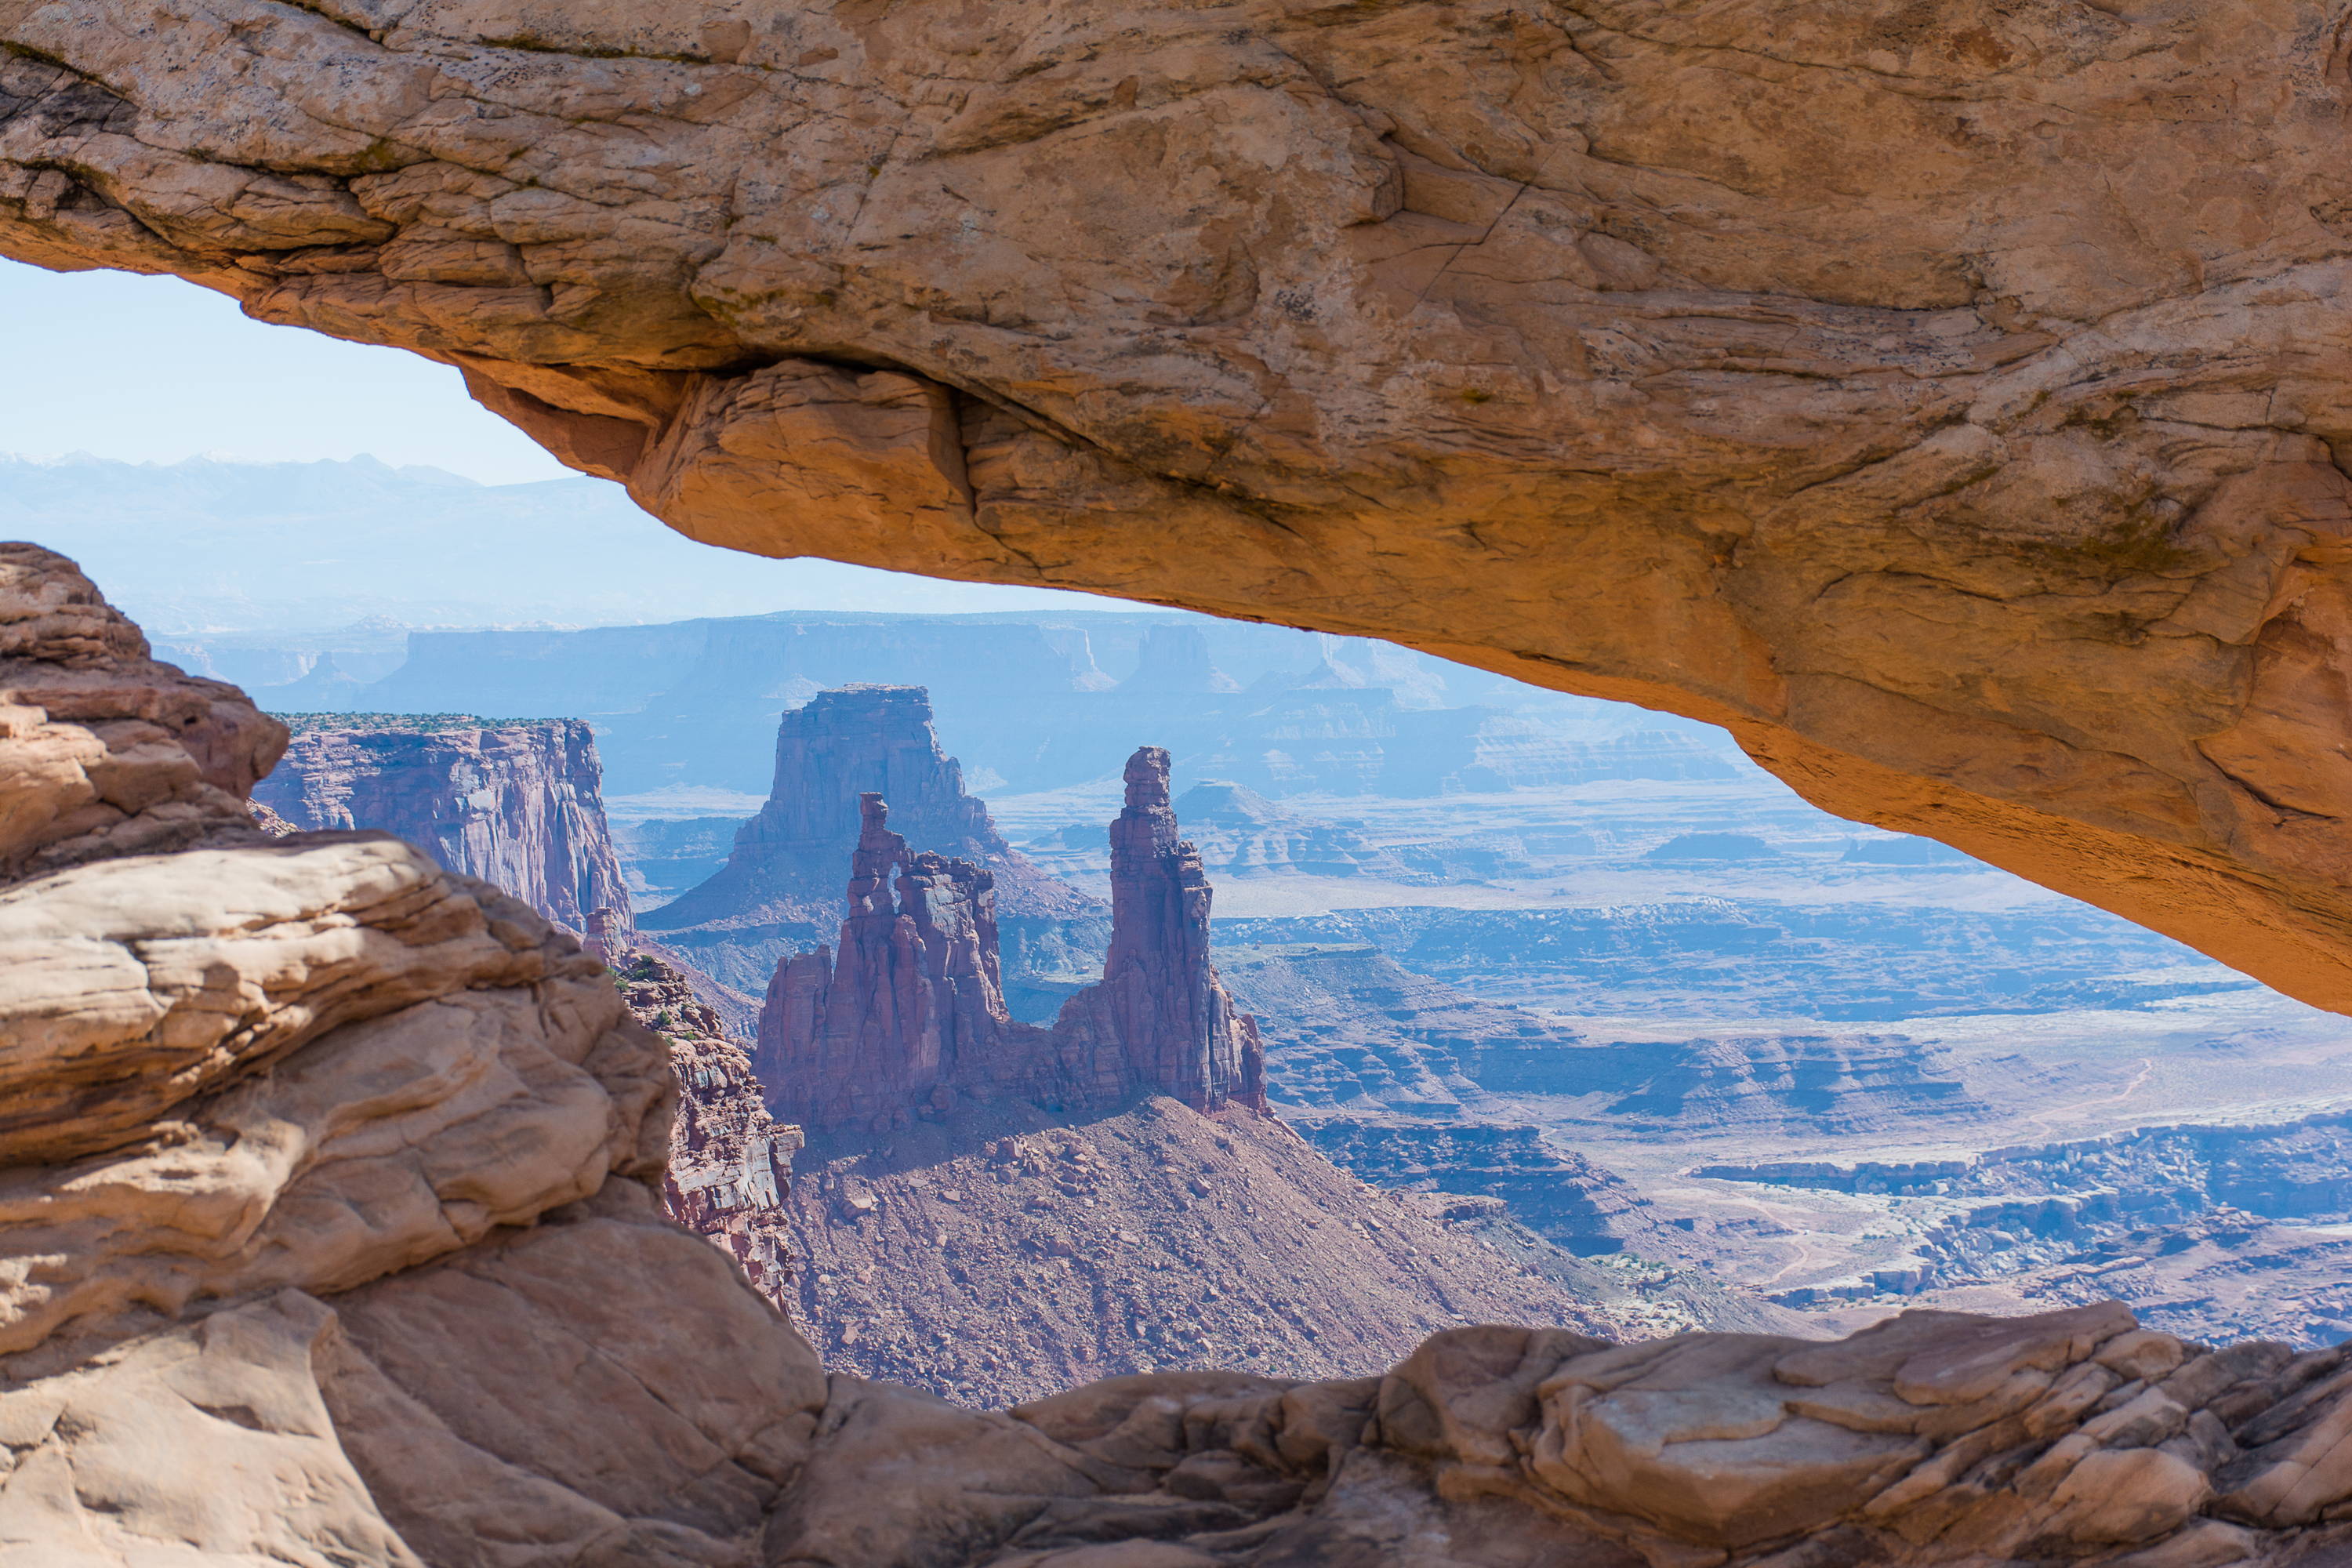 A trip to Canyonlands isn't complete without a canoe trip on the green river